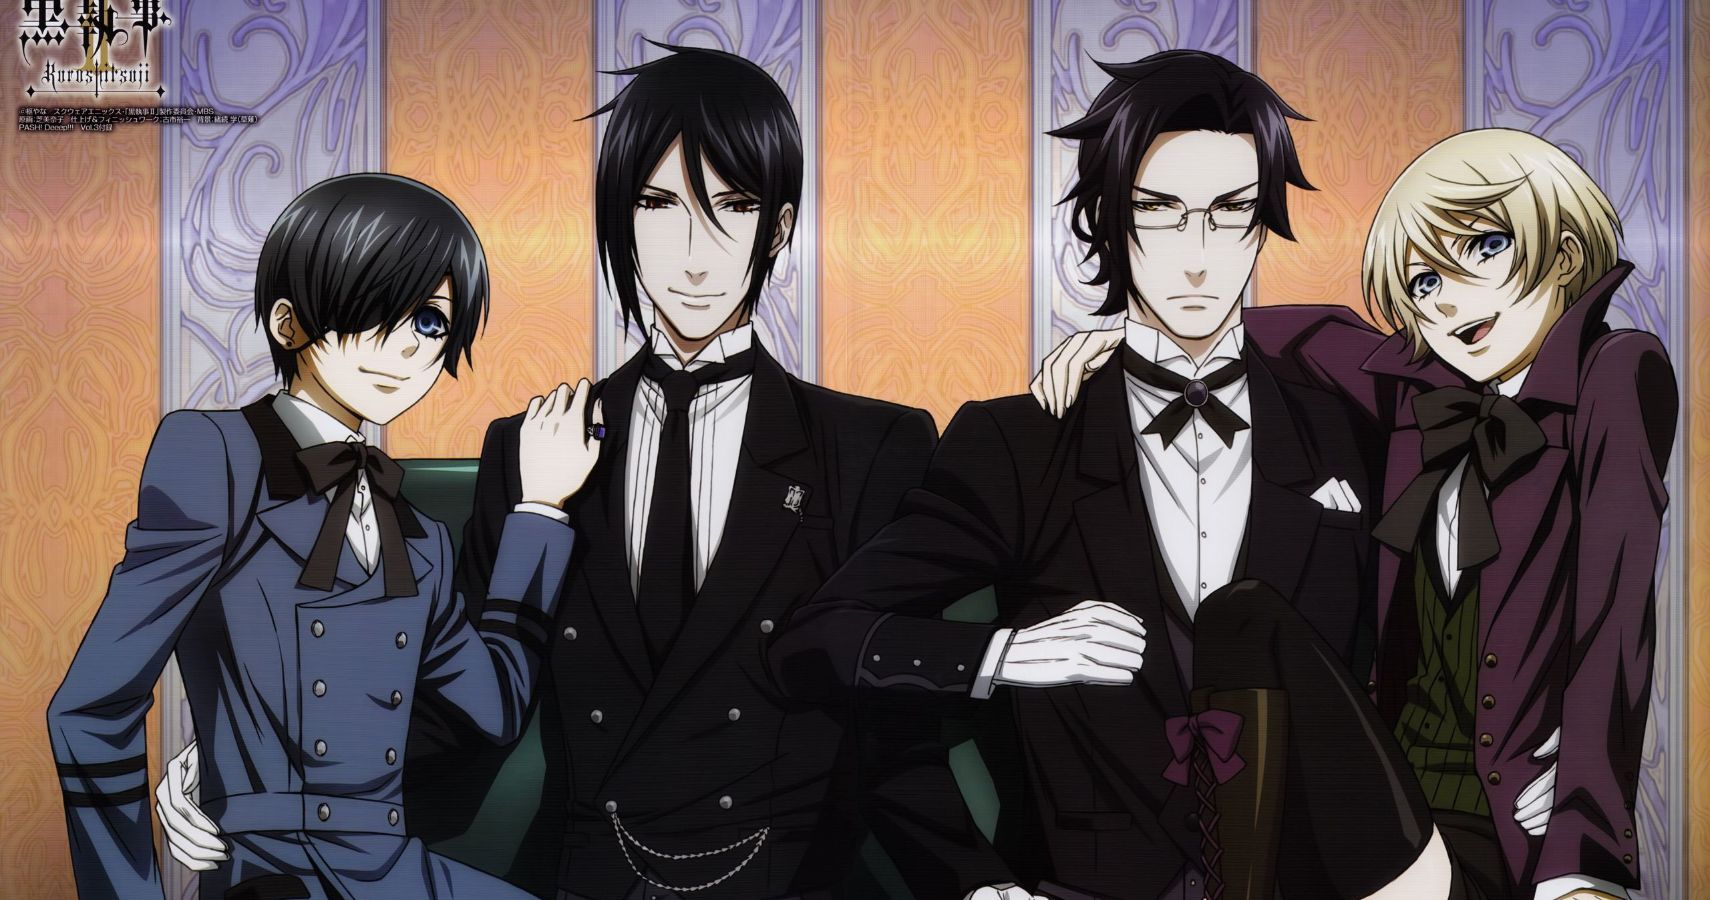 Black Butler: 5 Things We Loved About The Series (& 5 We Totally Hated)